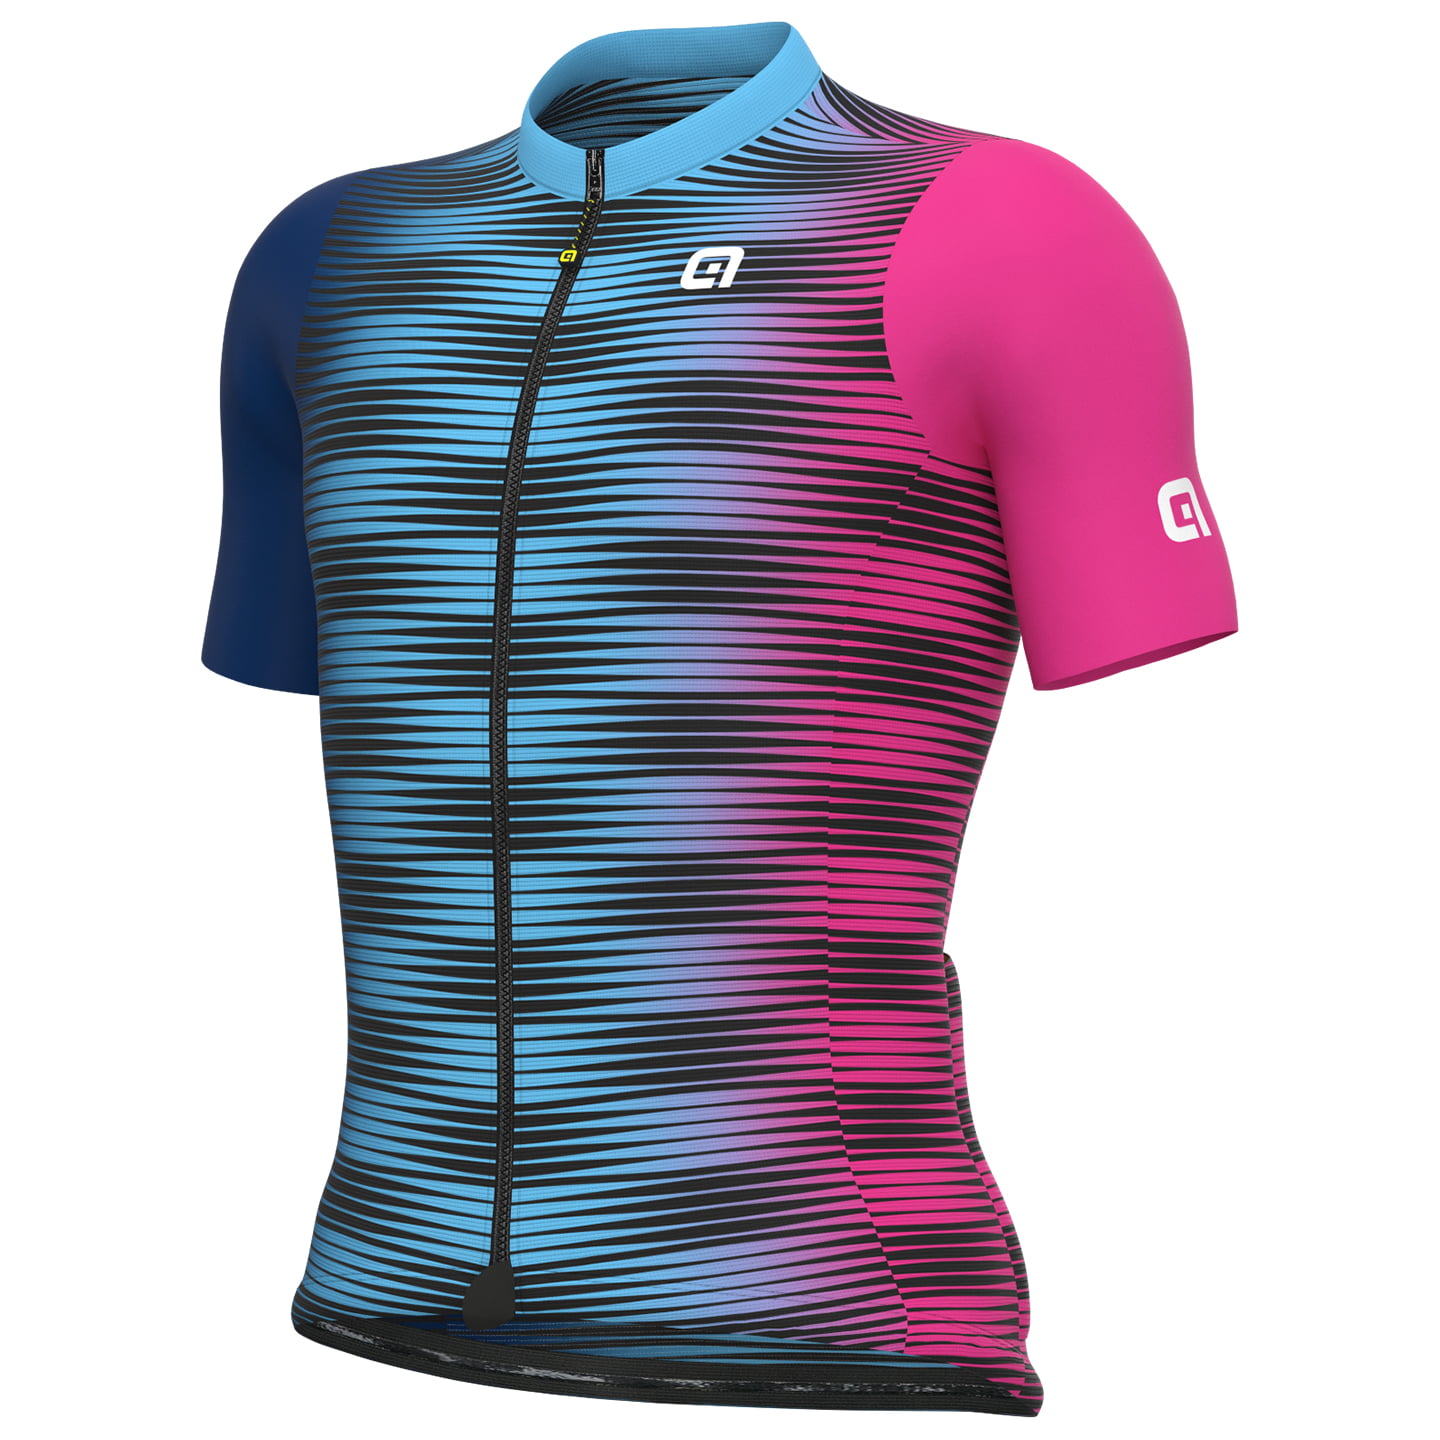 ALE Dinamica Short Sleeve Jersey Short Sleeve Jersey, for men, size L, Cycling jersey, Cycling clothing